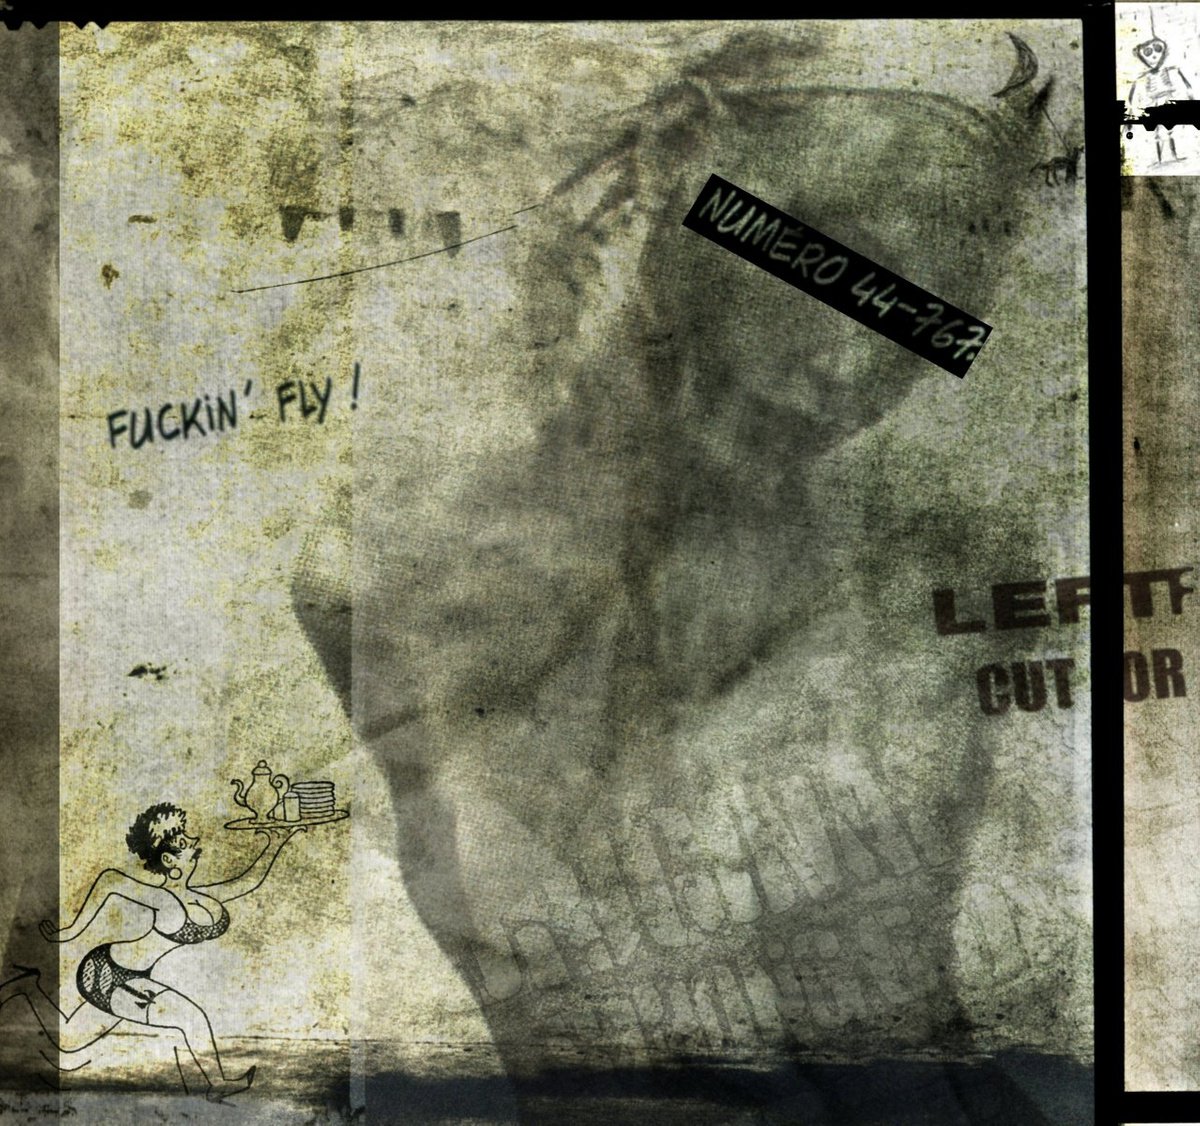 Fuckin Fly... by Philippe berthier